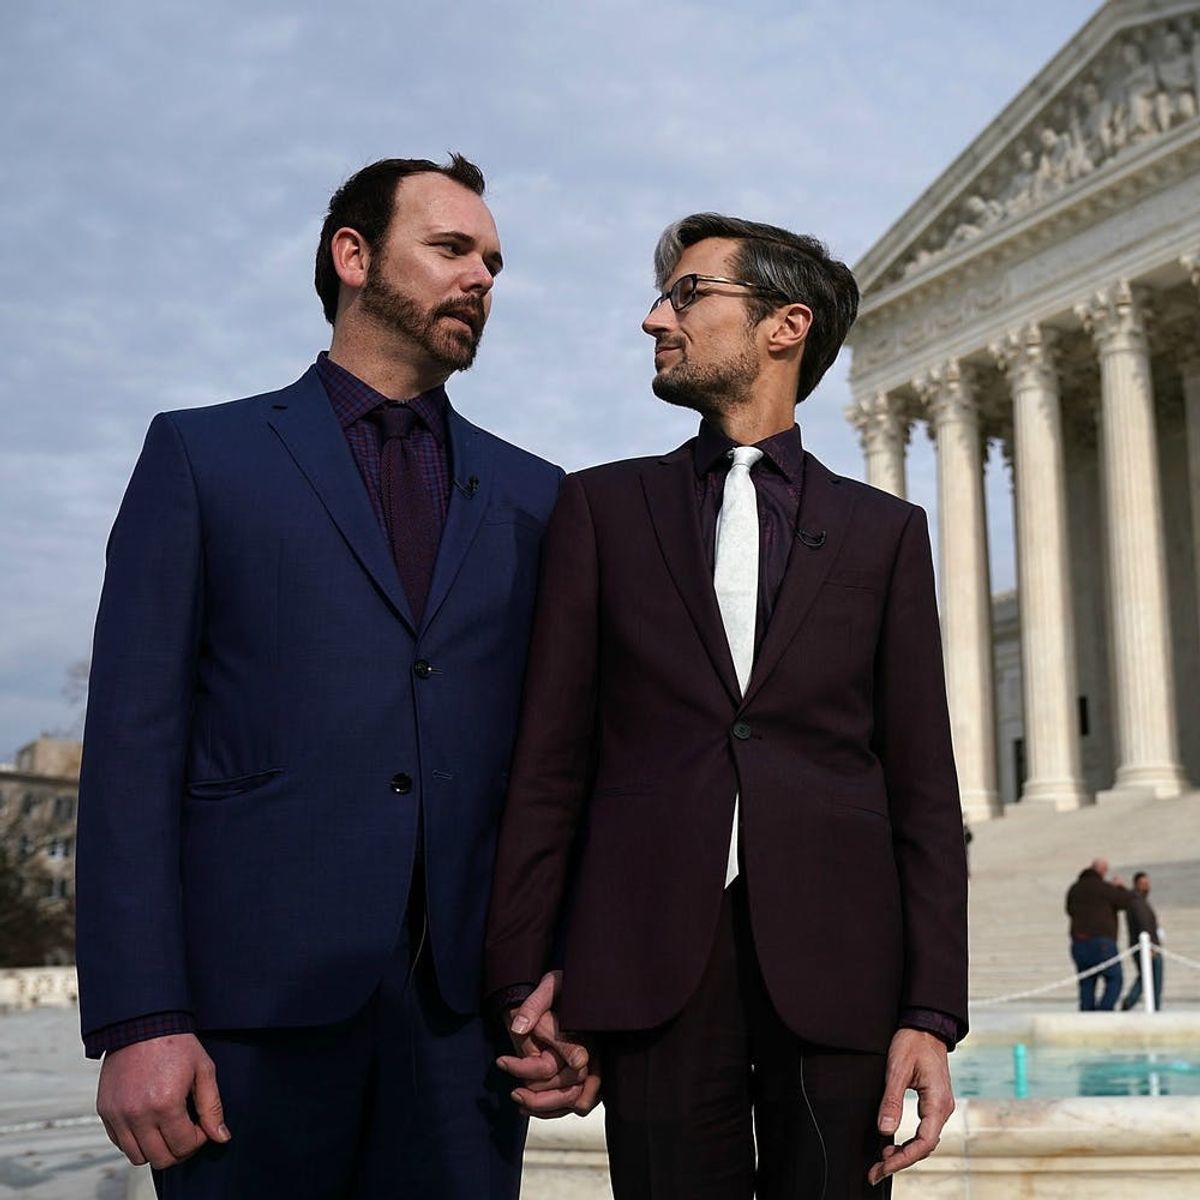 The Supreme Court Has Ruled in Favor of a Colorado Baker Who Refused to Make a Same-Sex Wedding Cake